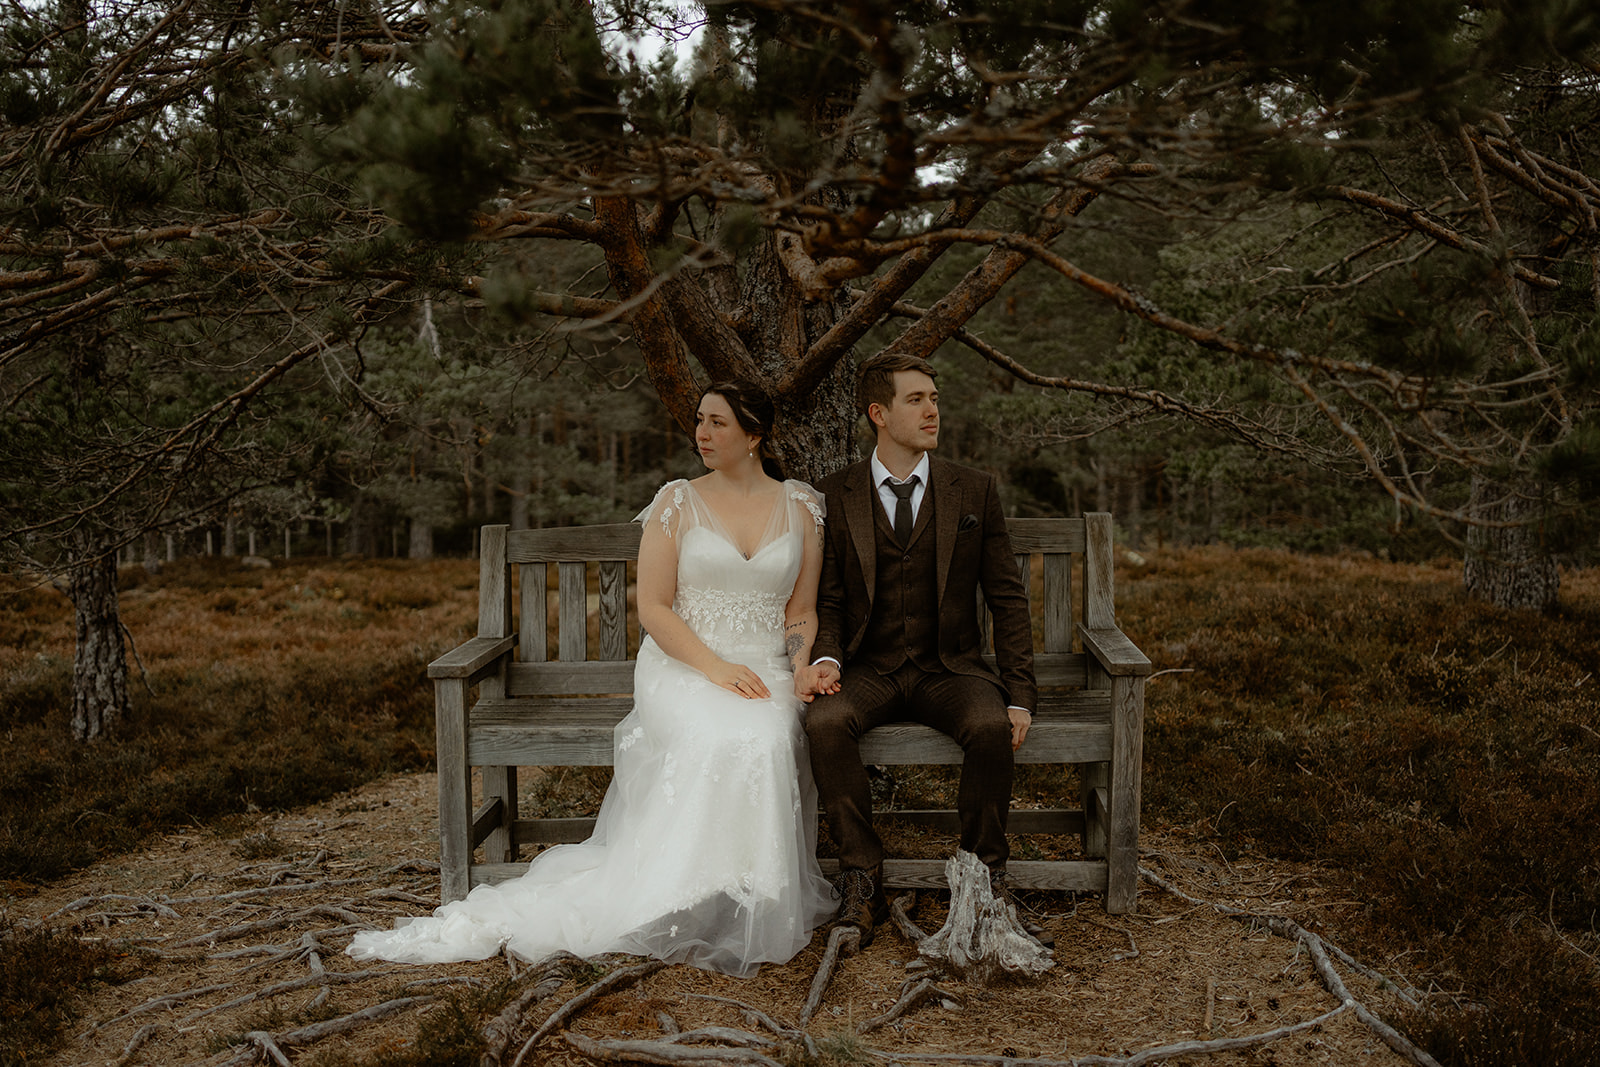 Cairngorm elopement. Couple sitting on bench underneath large tree holding hands.